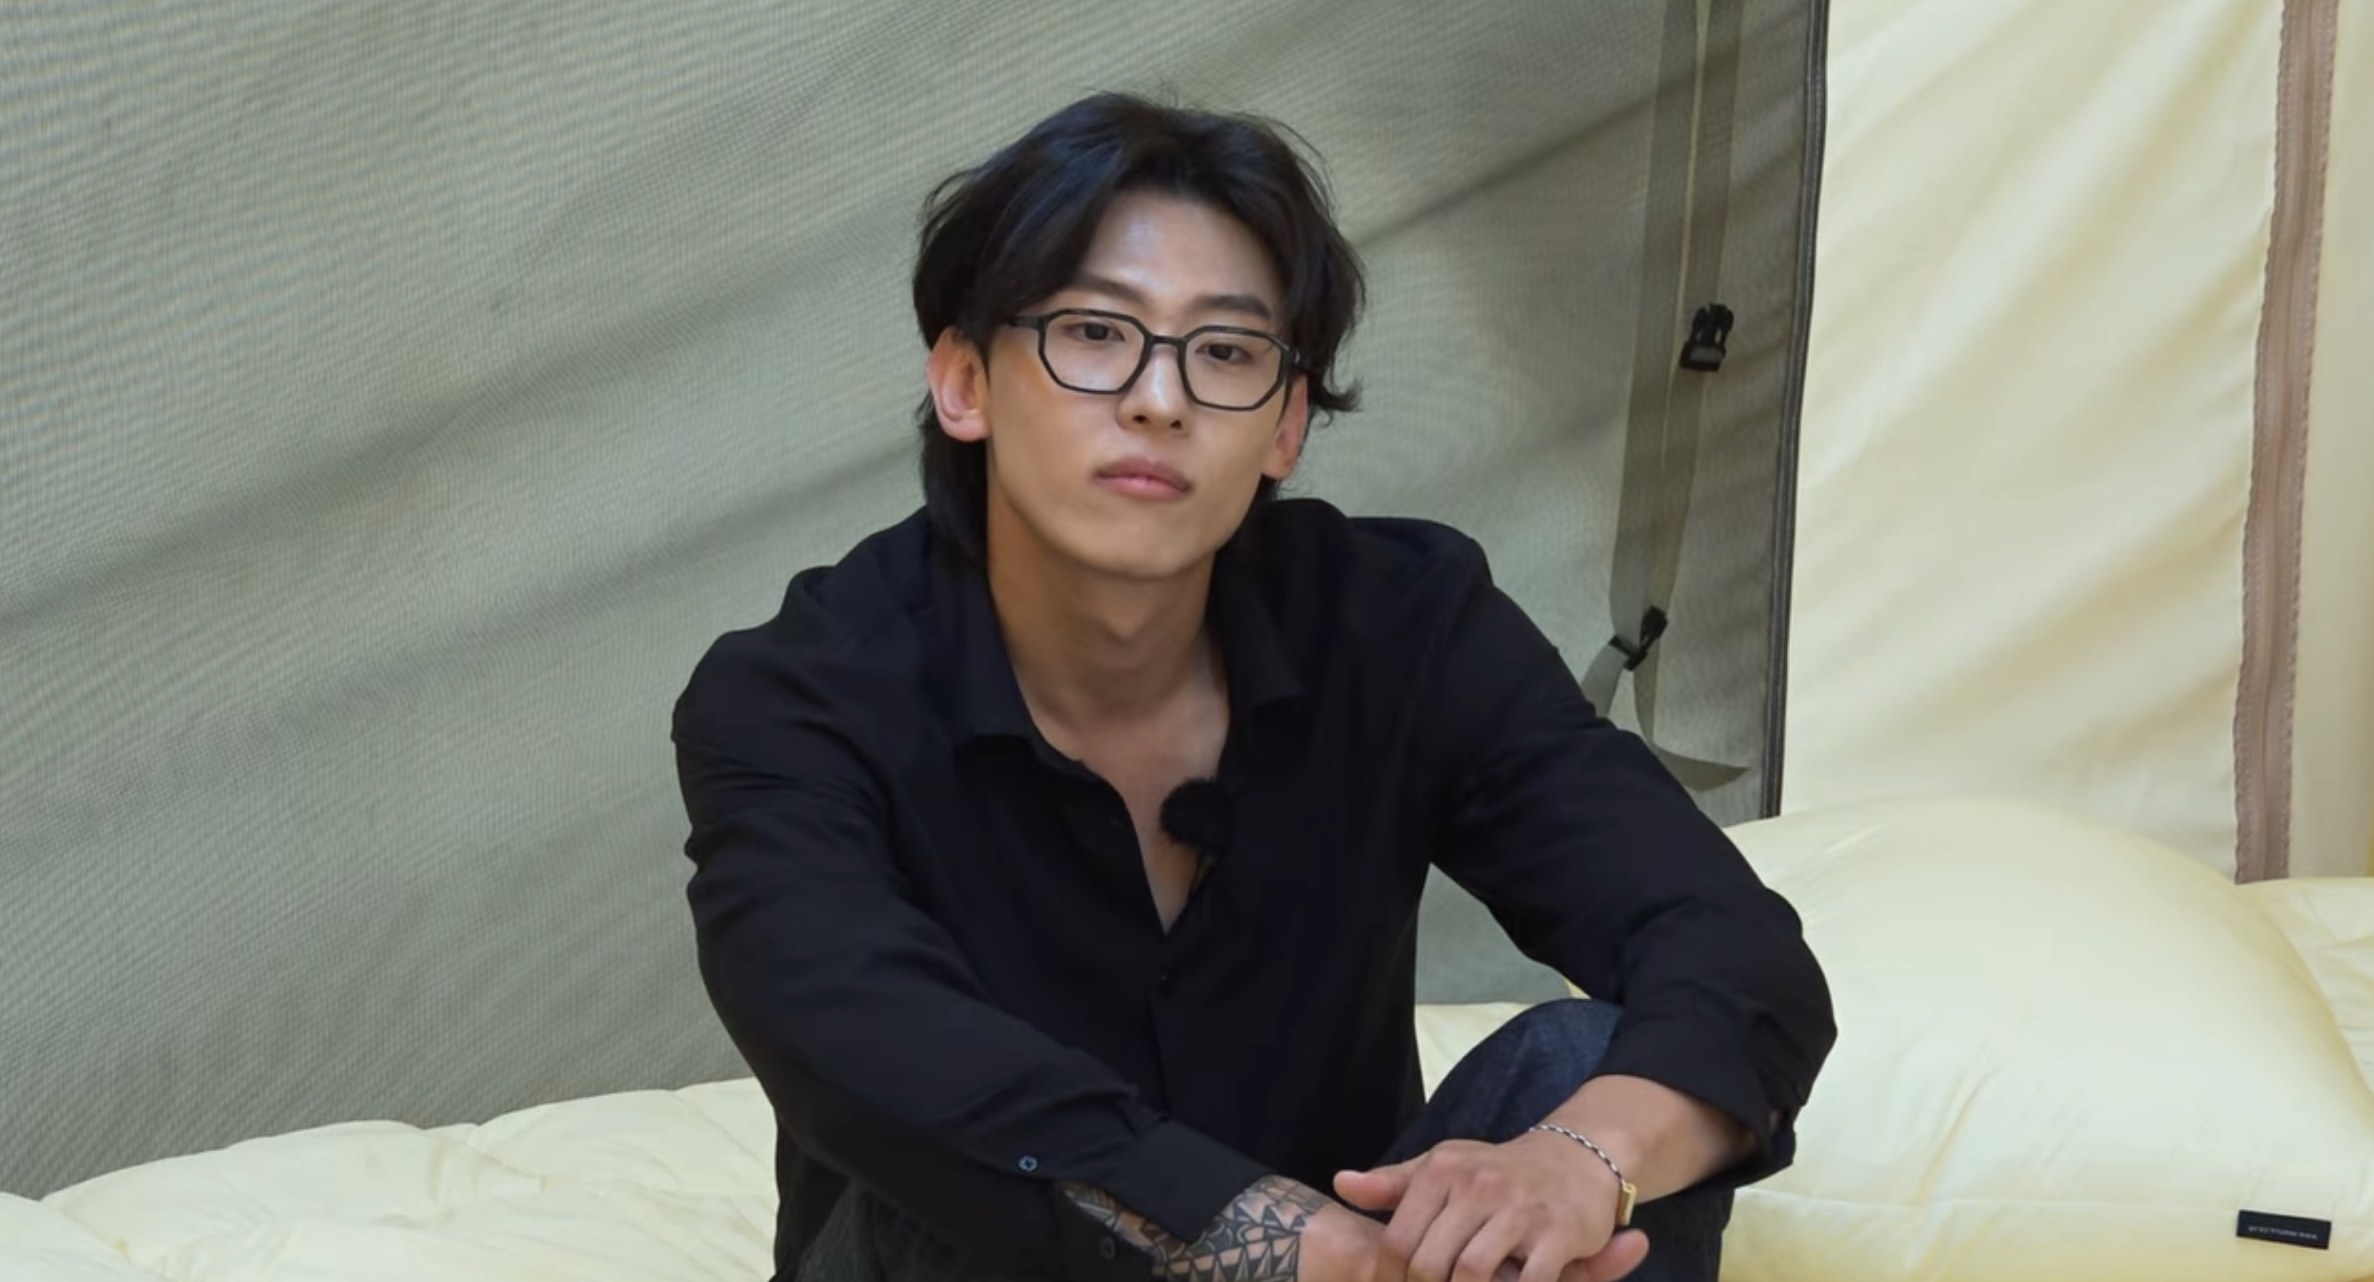 Wearing all black, Kim Jin-young sits on a bed and looks serious